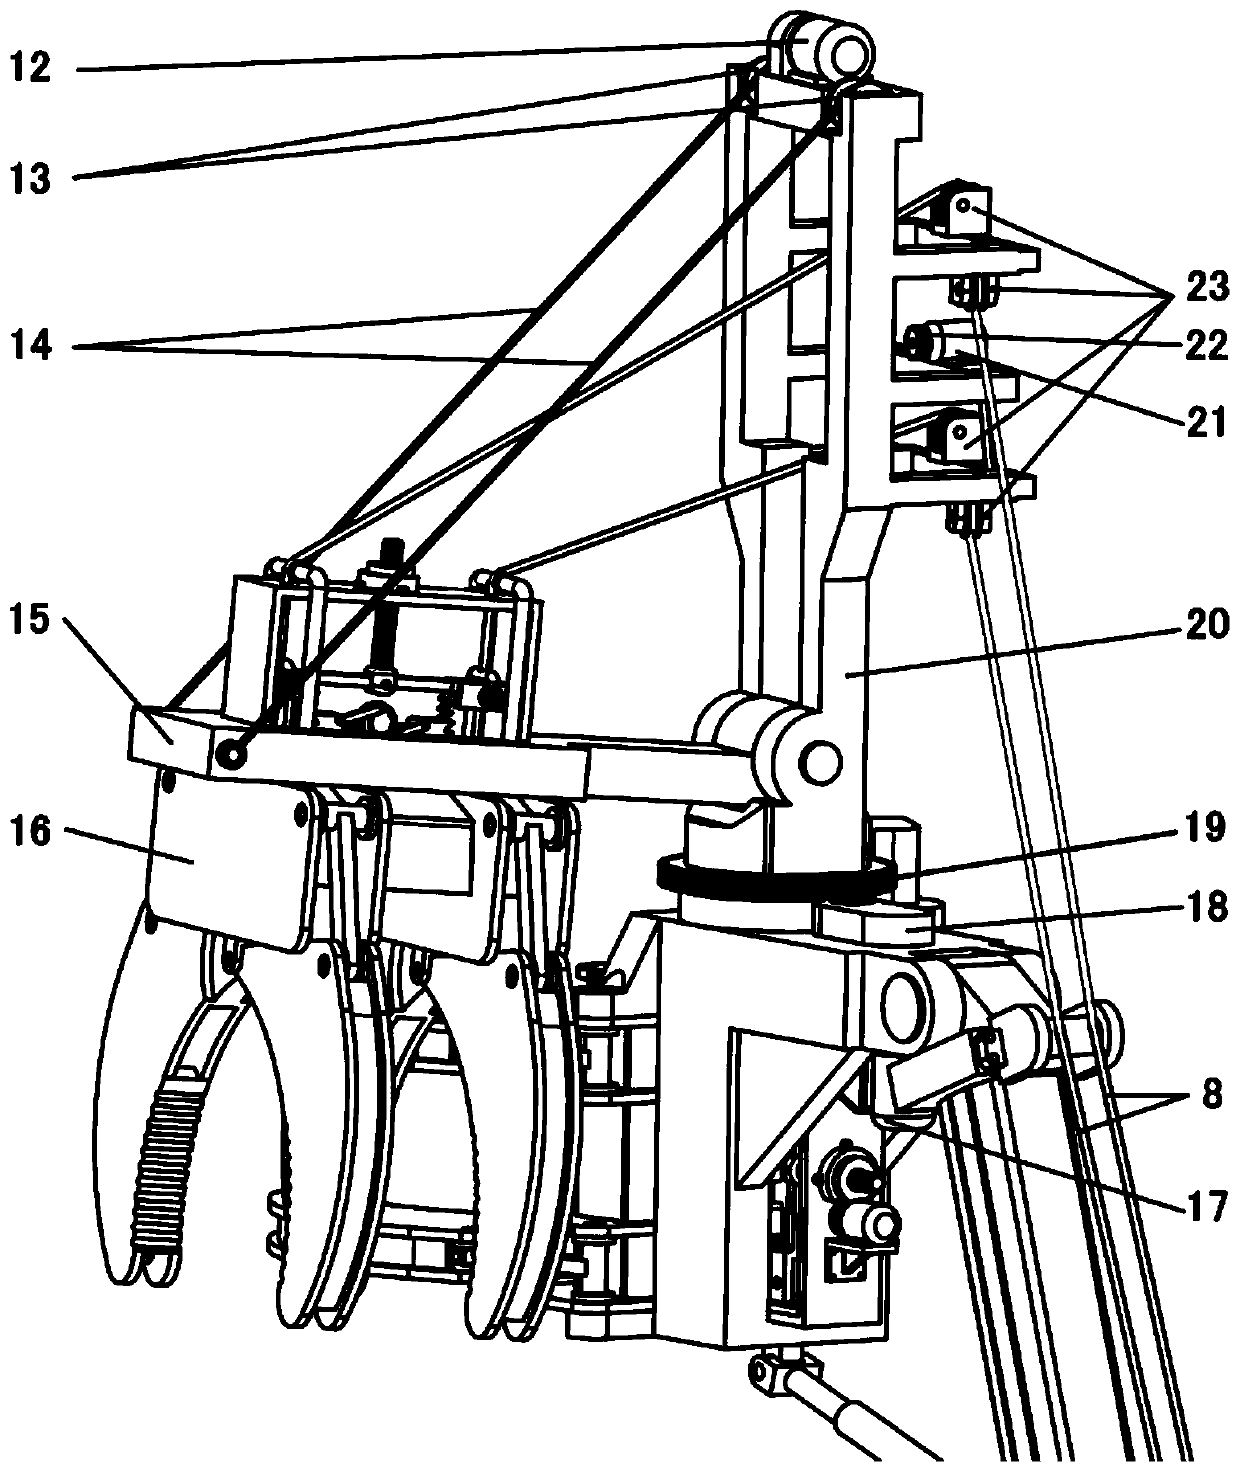 Automatic lifting overhead lumbering device